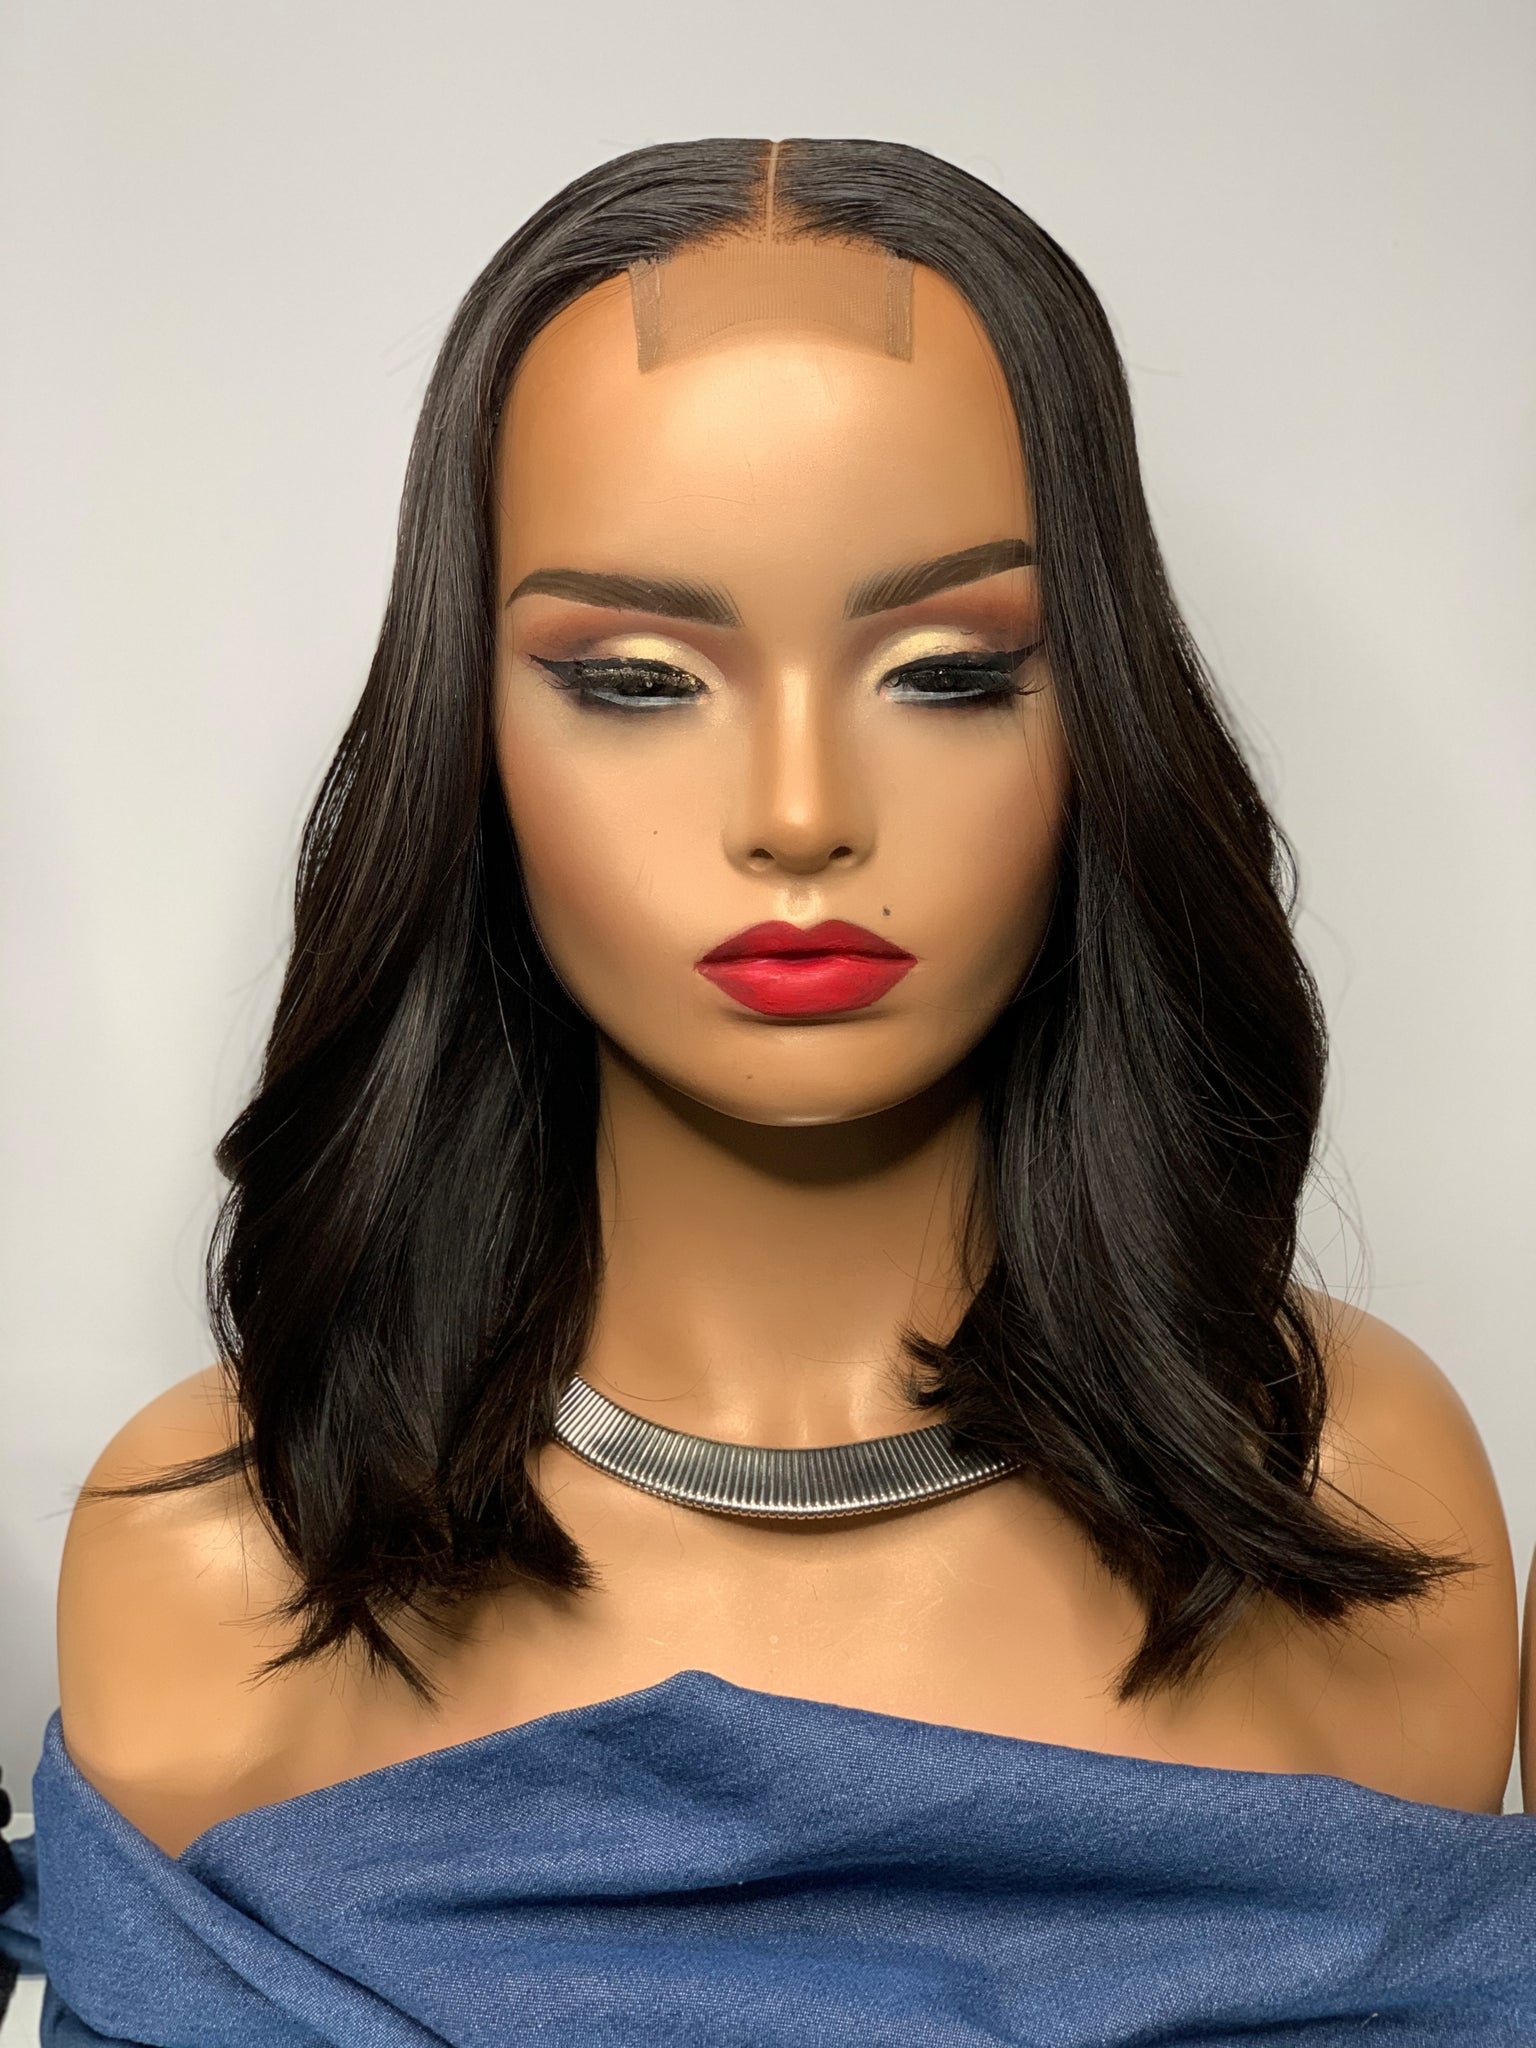 14 inch readymade (360 frontal) Brazilian water wave unit customized and colored